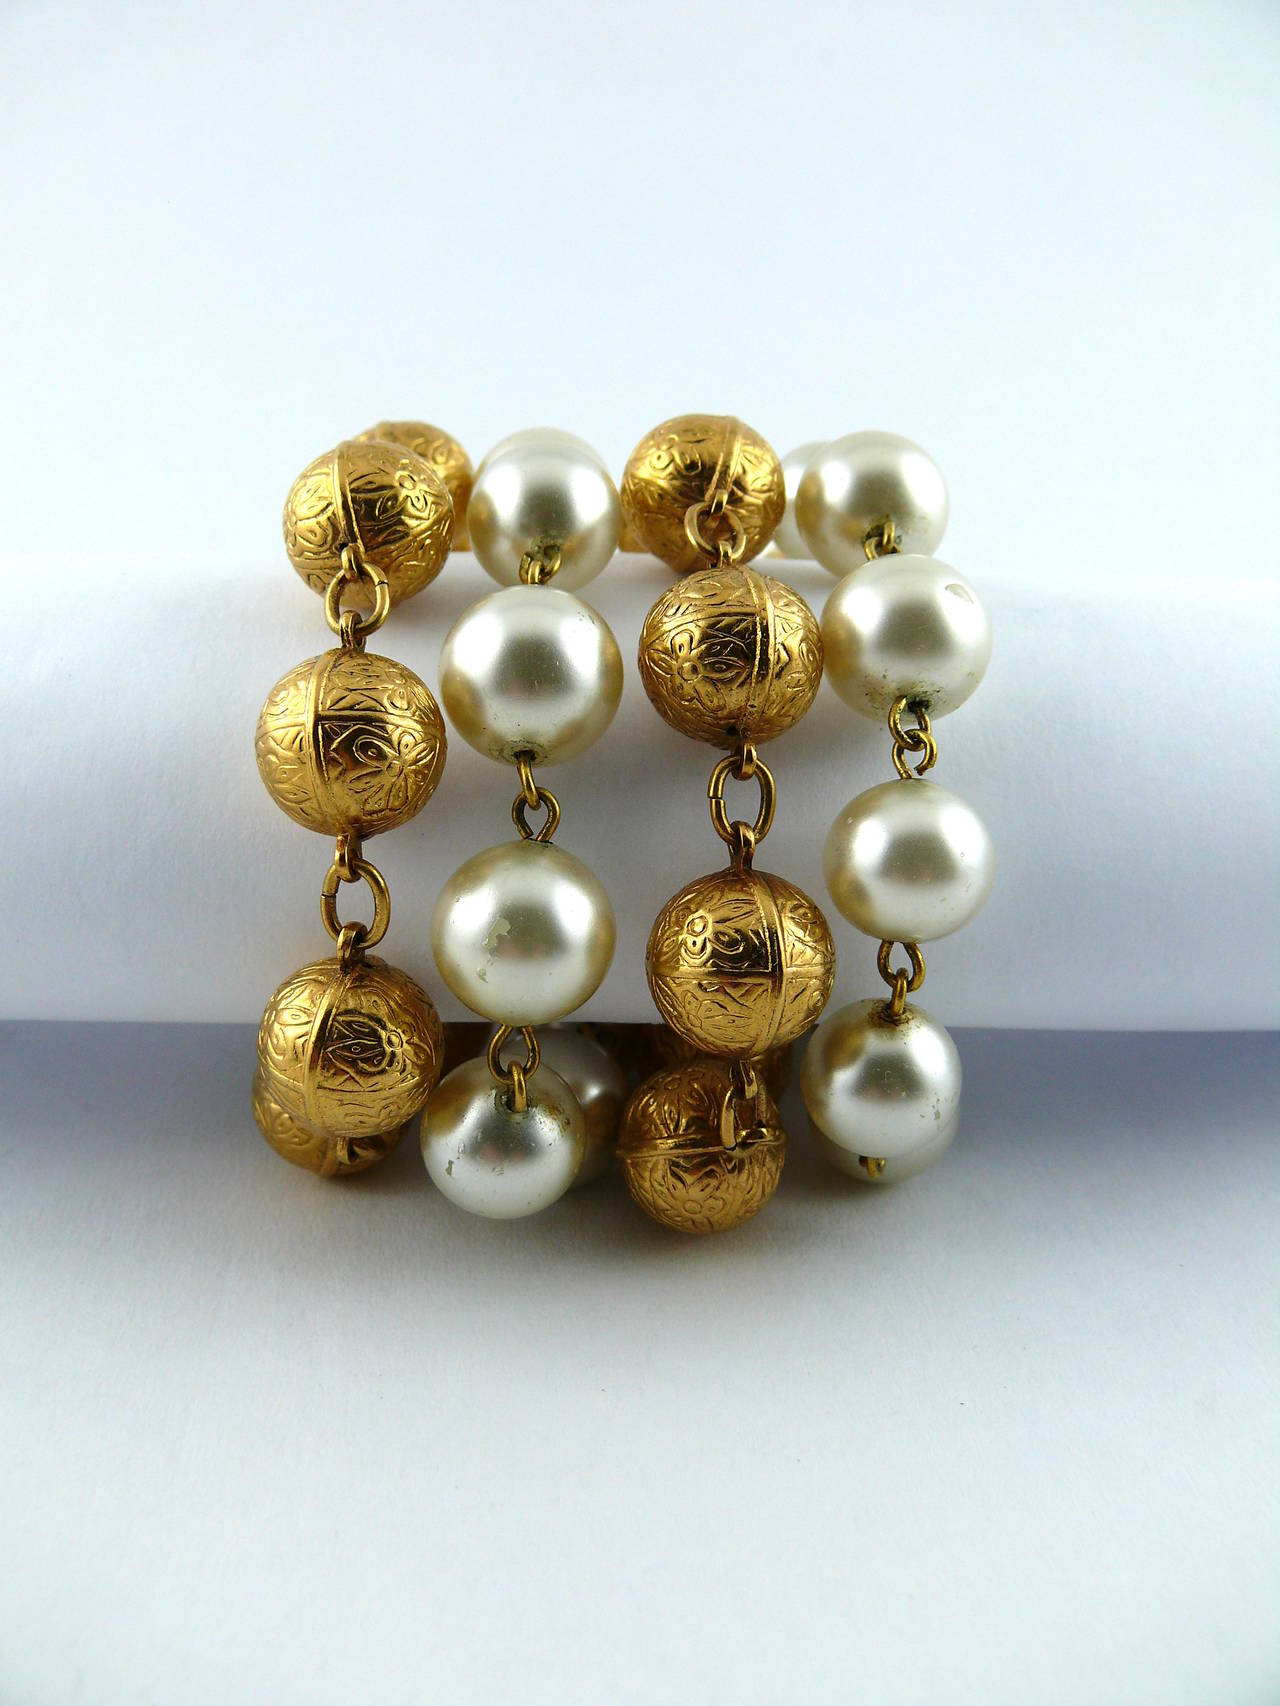 CHANEL vintage four strand bracelet featuring faux glass pearls and gold toned balls. Bracelet ends with a chain and CC logo charm.

Spring ring clasp closure

Embossed CHANEL Made in France.

Indicative measurements : length approx. 20 cm (7.87